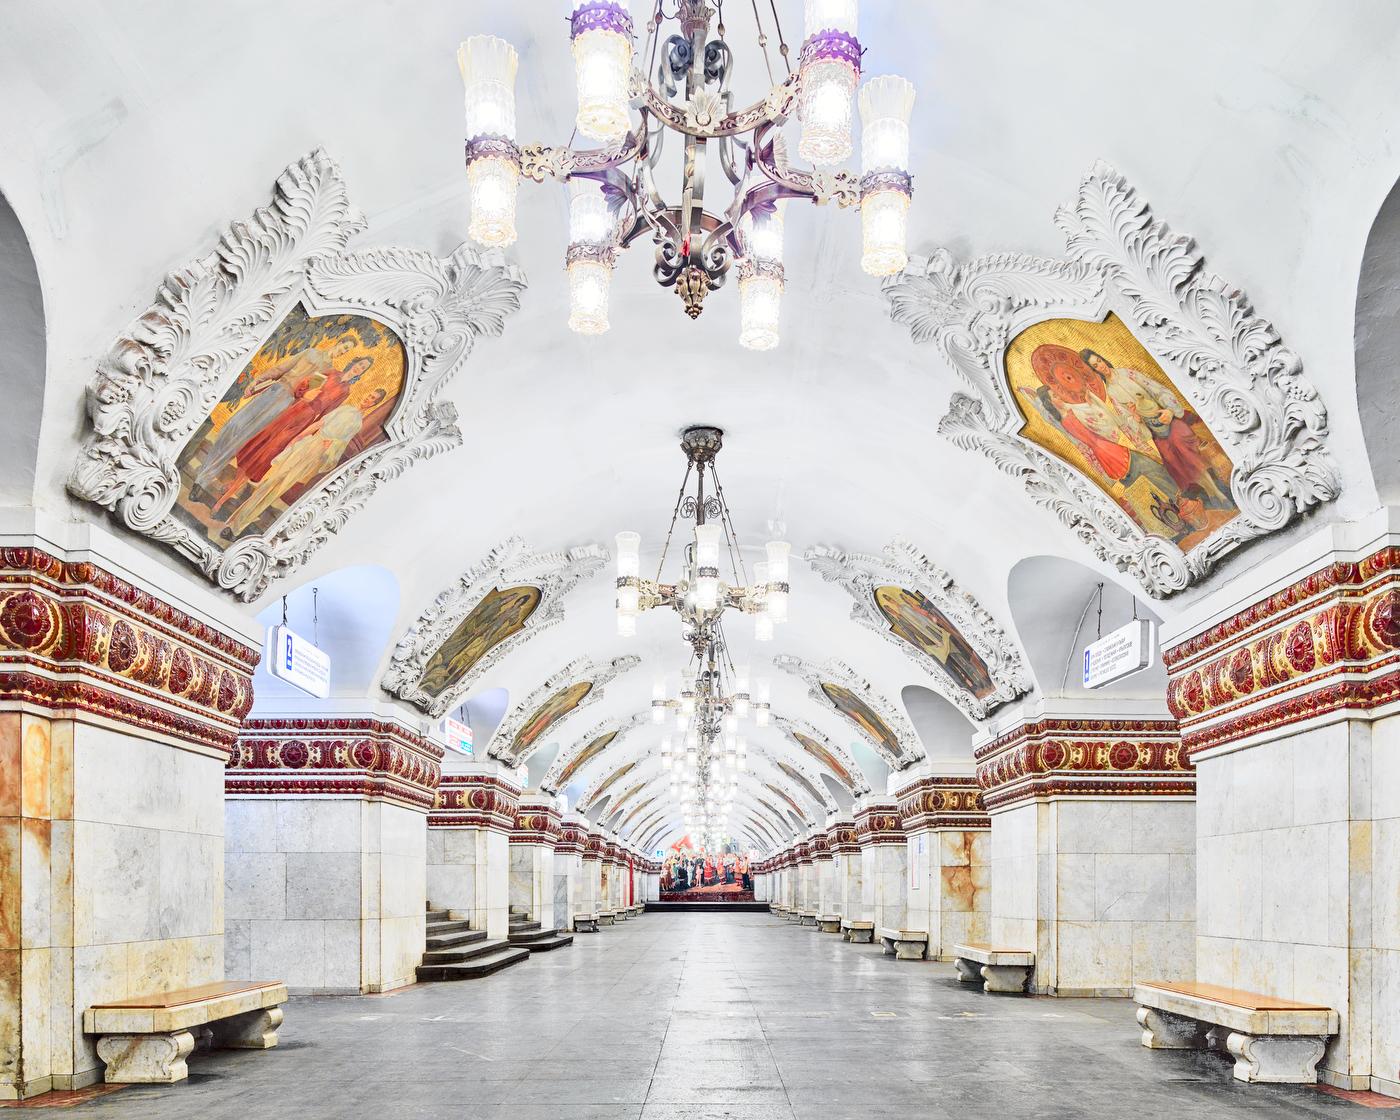 All available sizes & editions for each size of this photograph:
21” x 26" Edition of 7
32” x 40" Edition of 7
44” x 55” Edition of 10
59” x 73.5” Edition of 5

Burdeny’s Russia images, particularly in his photographs of the Moscow Metro, in which